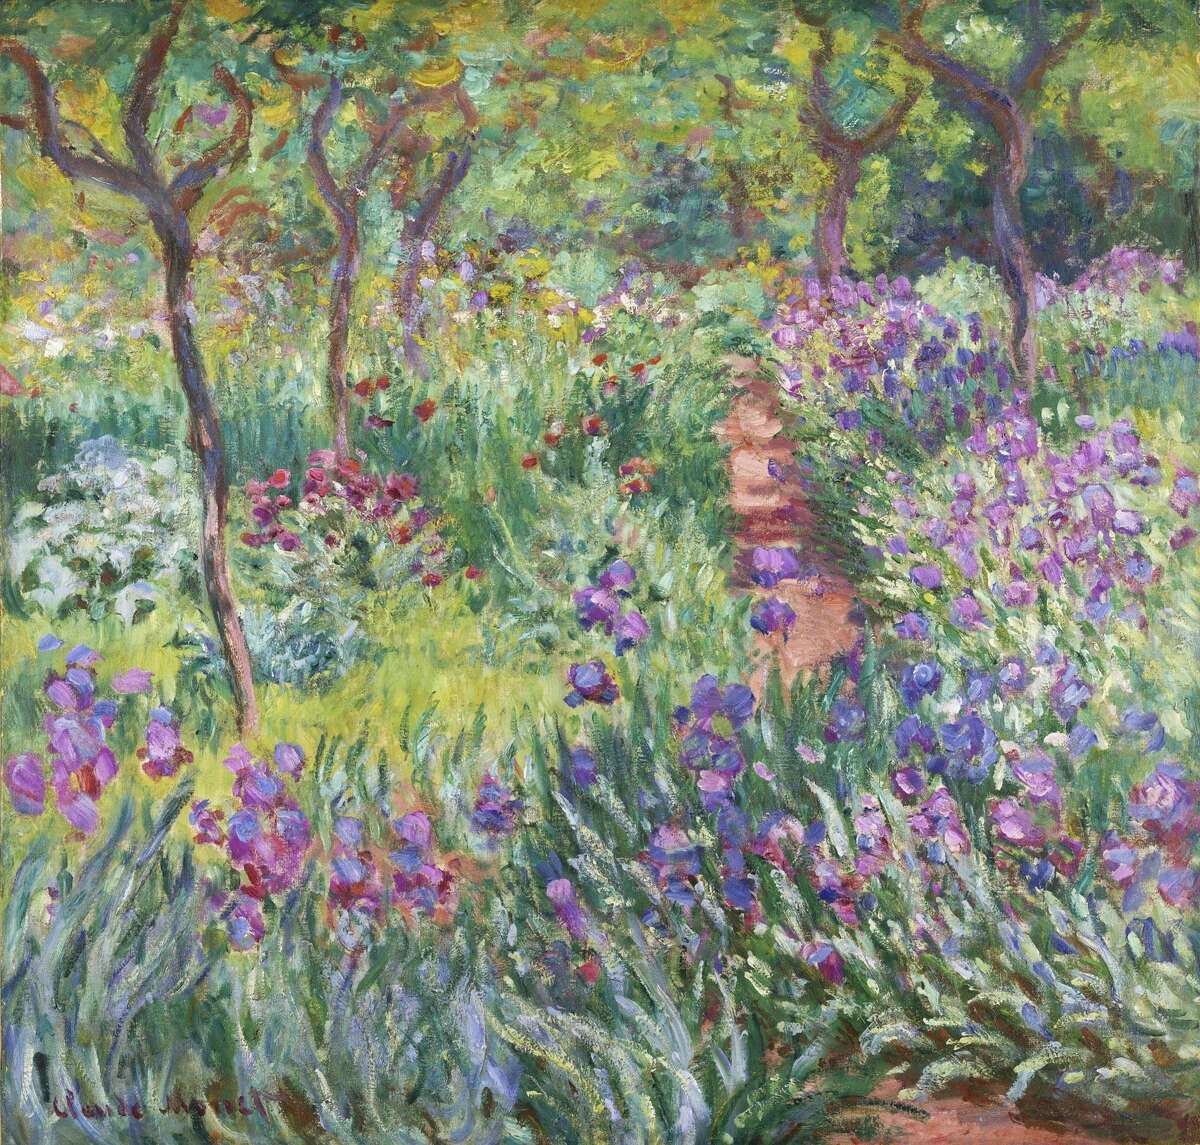 This undated photo provided by the New York Botanical Garden shows Claude Monet's painting, "The Artist's Garden in Giverny," which is on display in a new exhibition at the New York Botanical Garden, in New York. Monet once said he owed becoming a painter to his love for flowers and the exhibit explores the French impressionist artist's passion for his beloved water lilies, irises and gardens and how they influenced his art. (AP Photo/New York Botanical Garden)